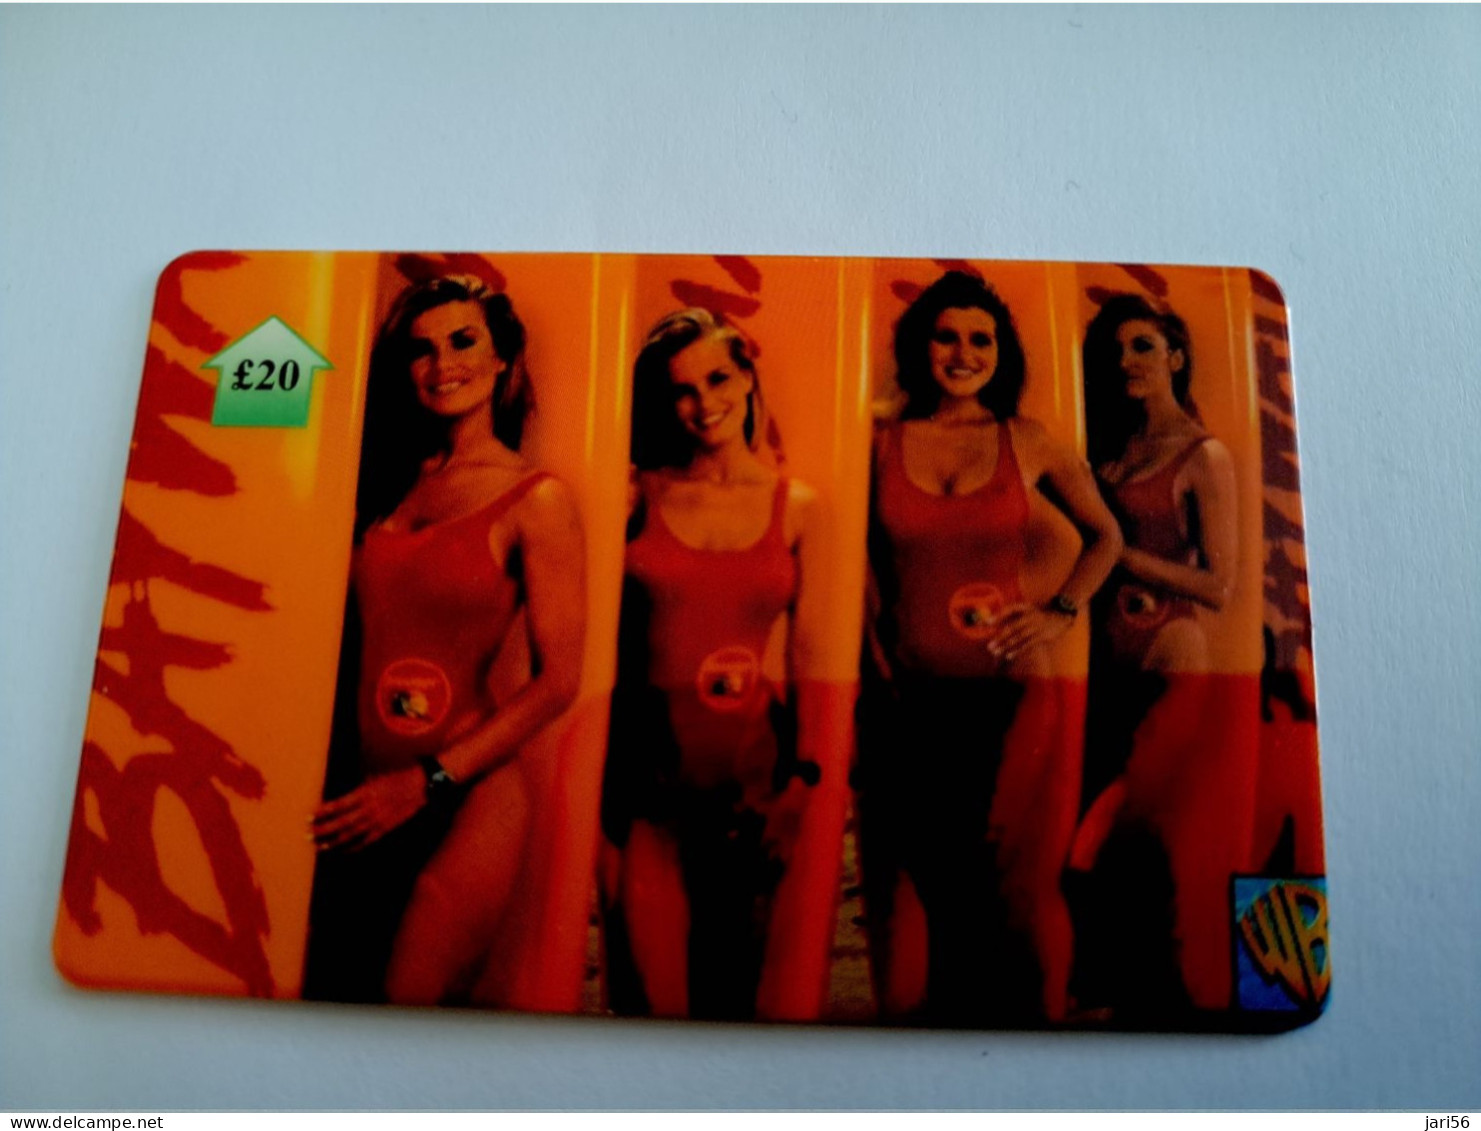 GREAT BRITAIN / 20 POUND /MAGSTRIPE  / BAYWATCH PHONECARD/ LIMITED EDITION/ ONLY 500 EX     **15684** - [10] Collections